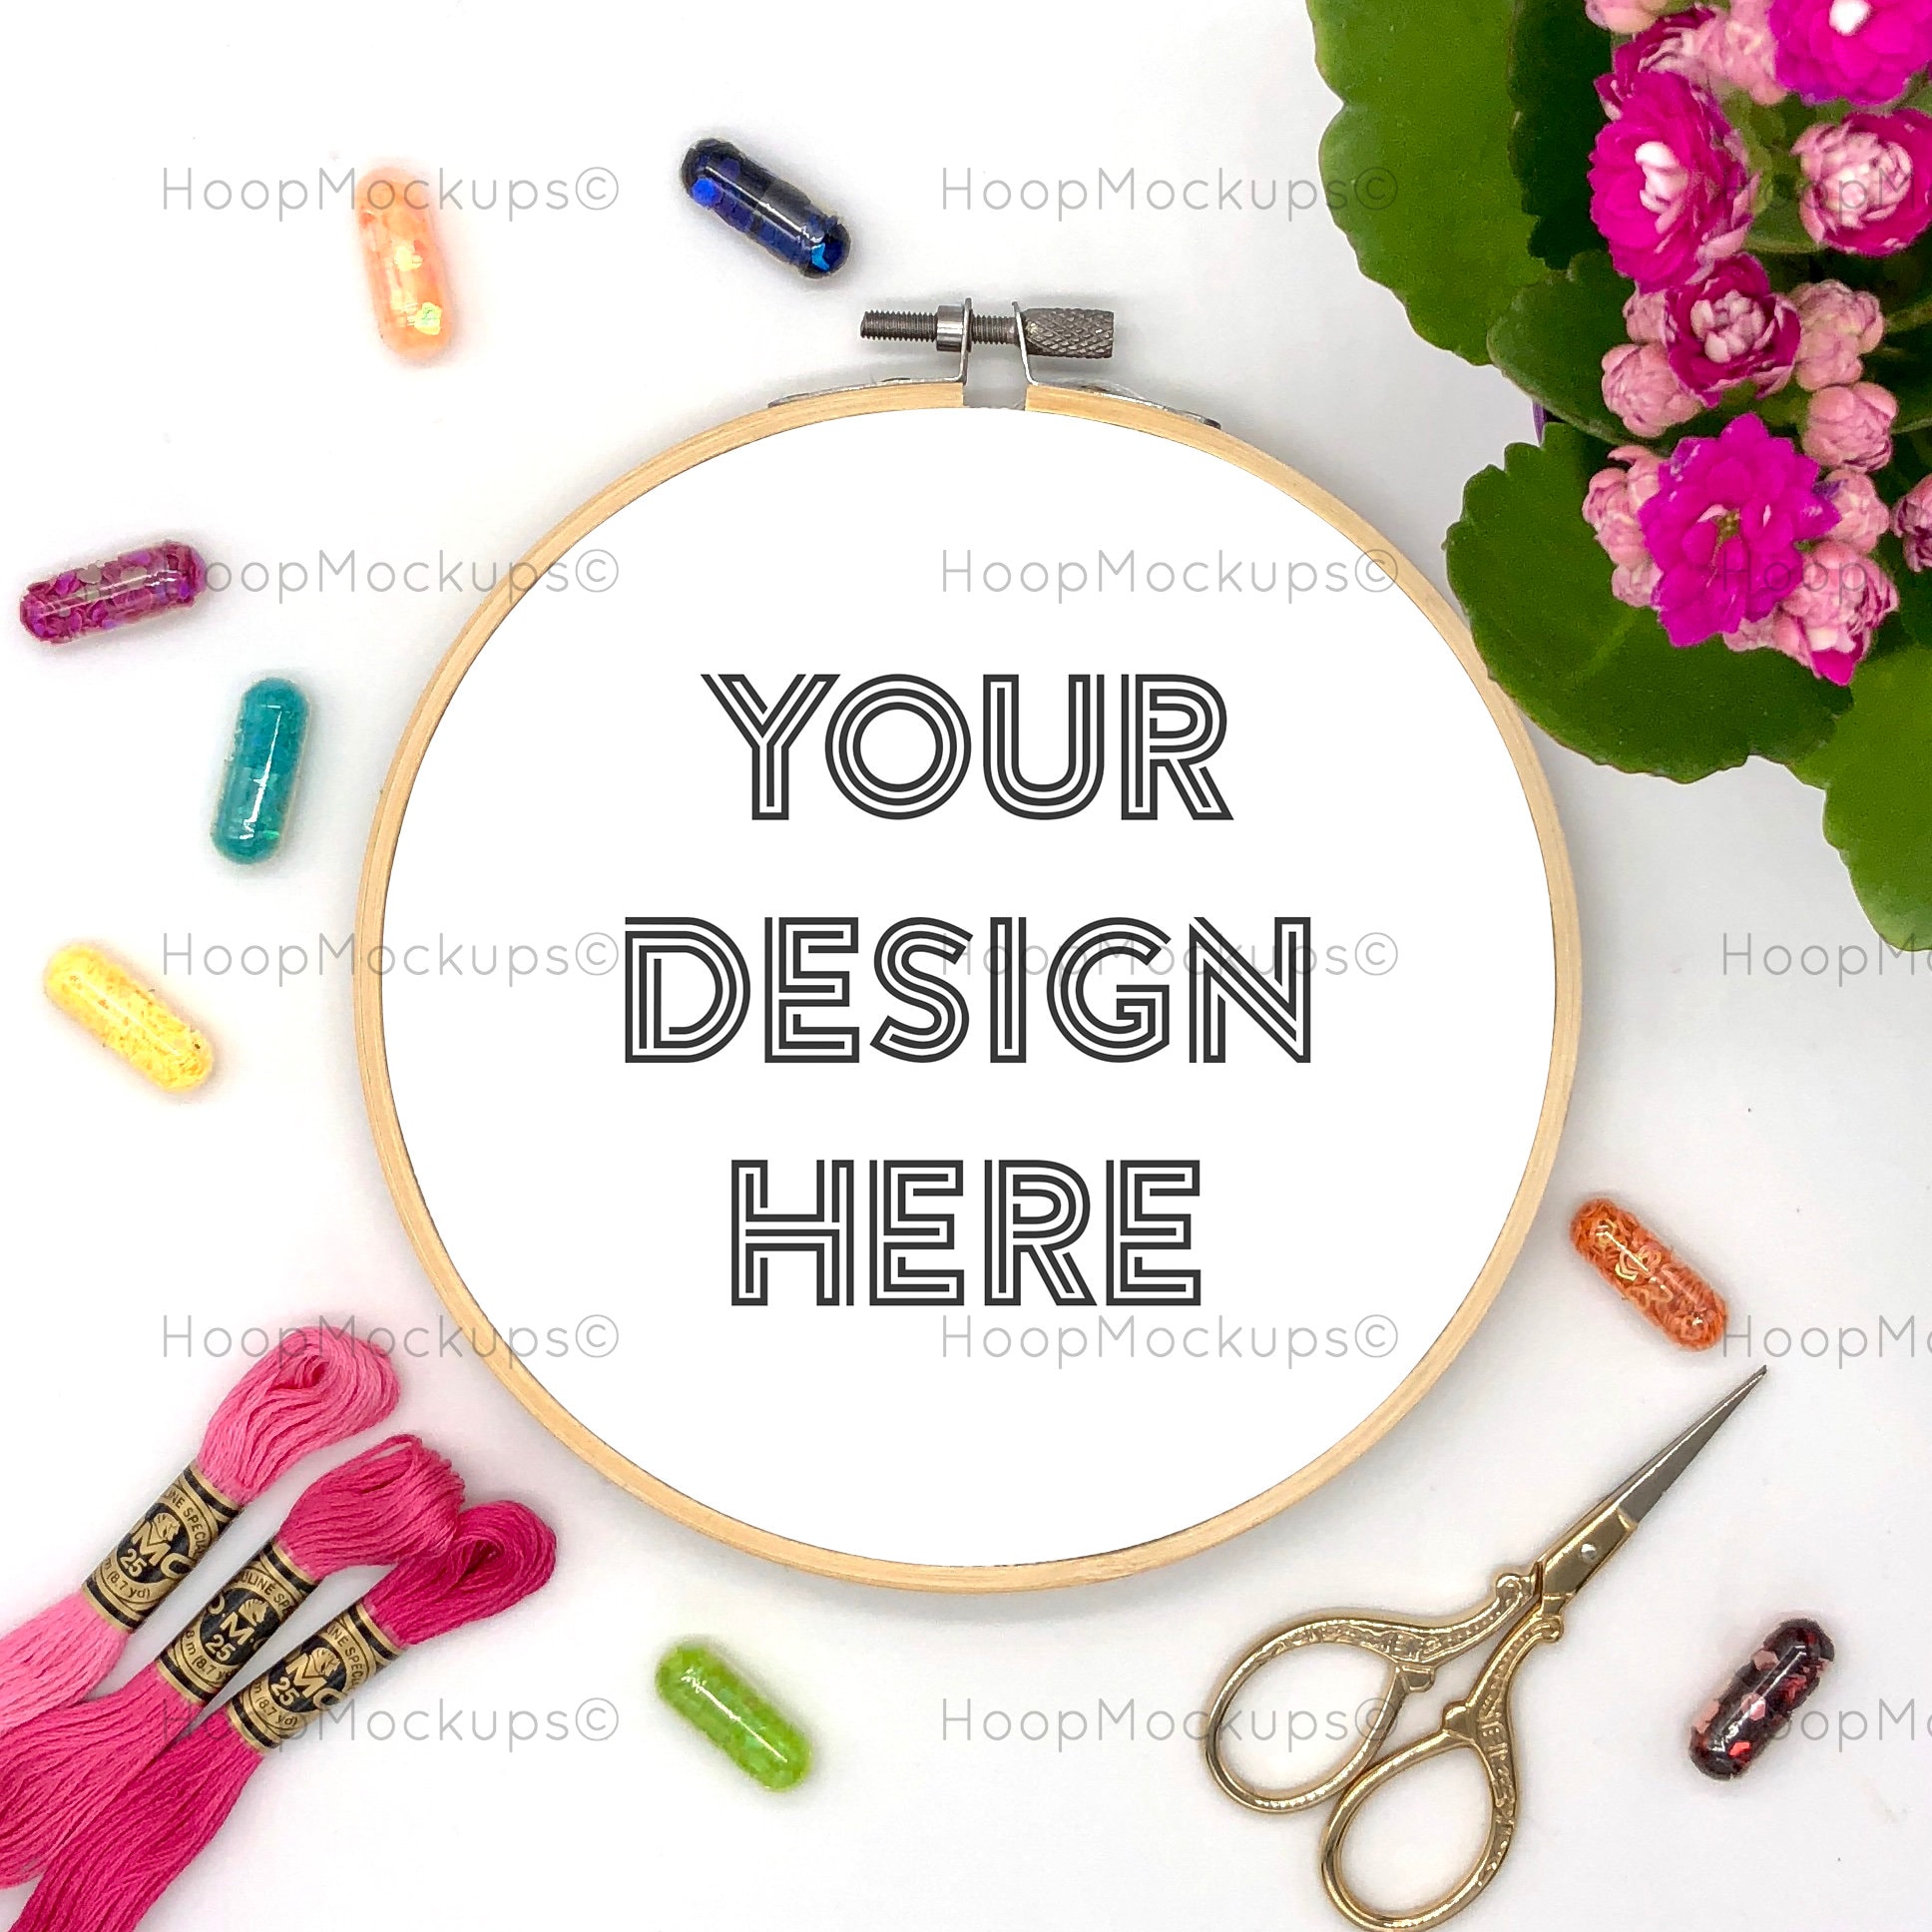 Embroidery Hoop Mockup on Light Background Stock Photo - Image of